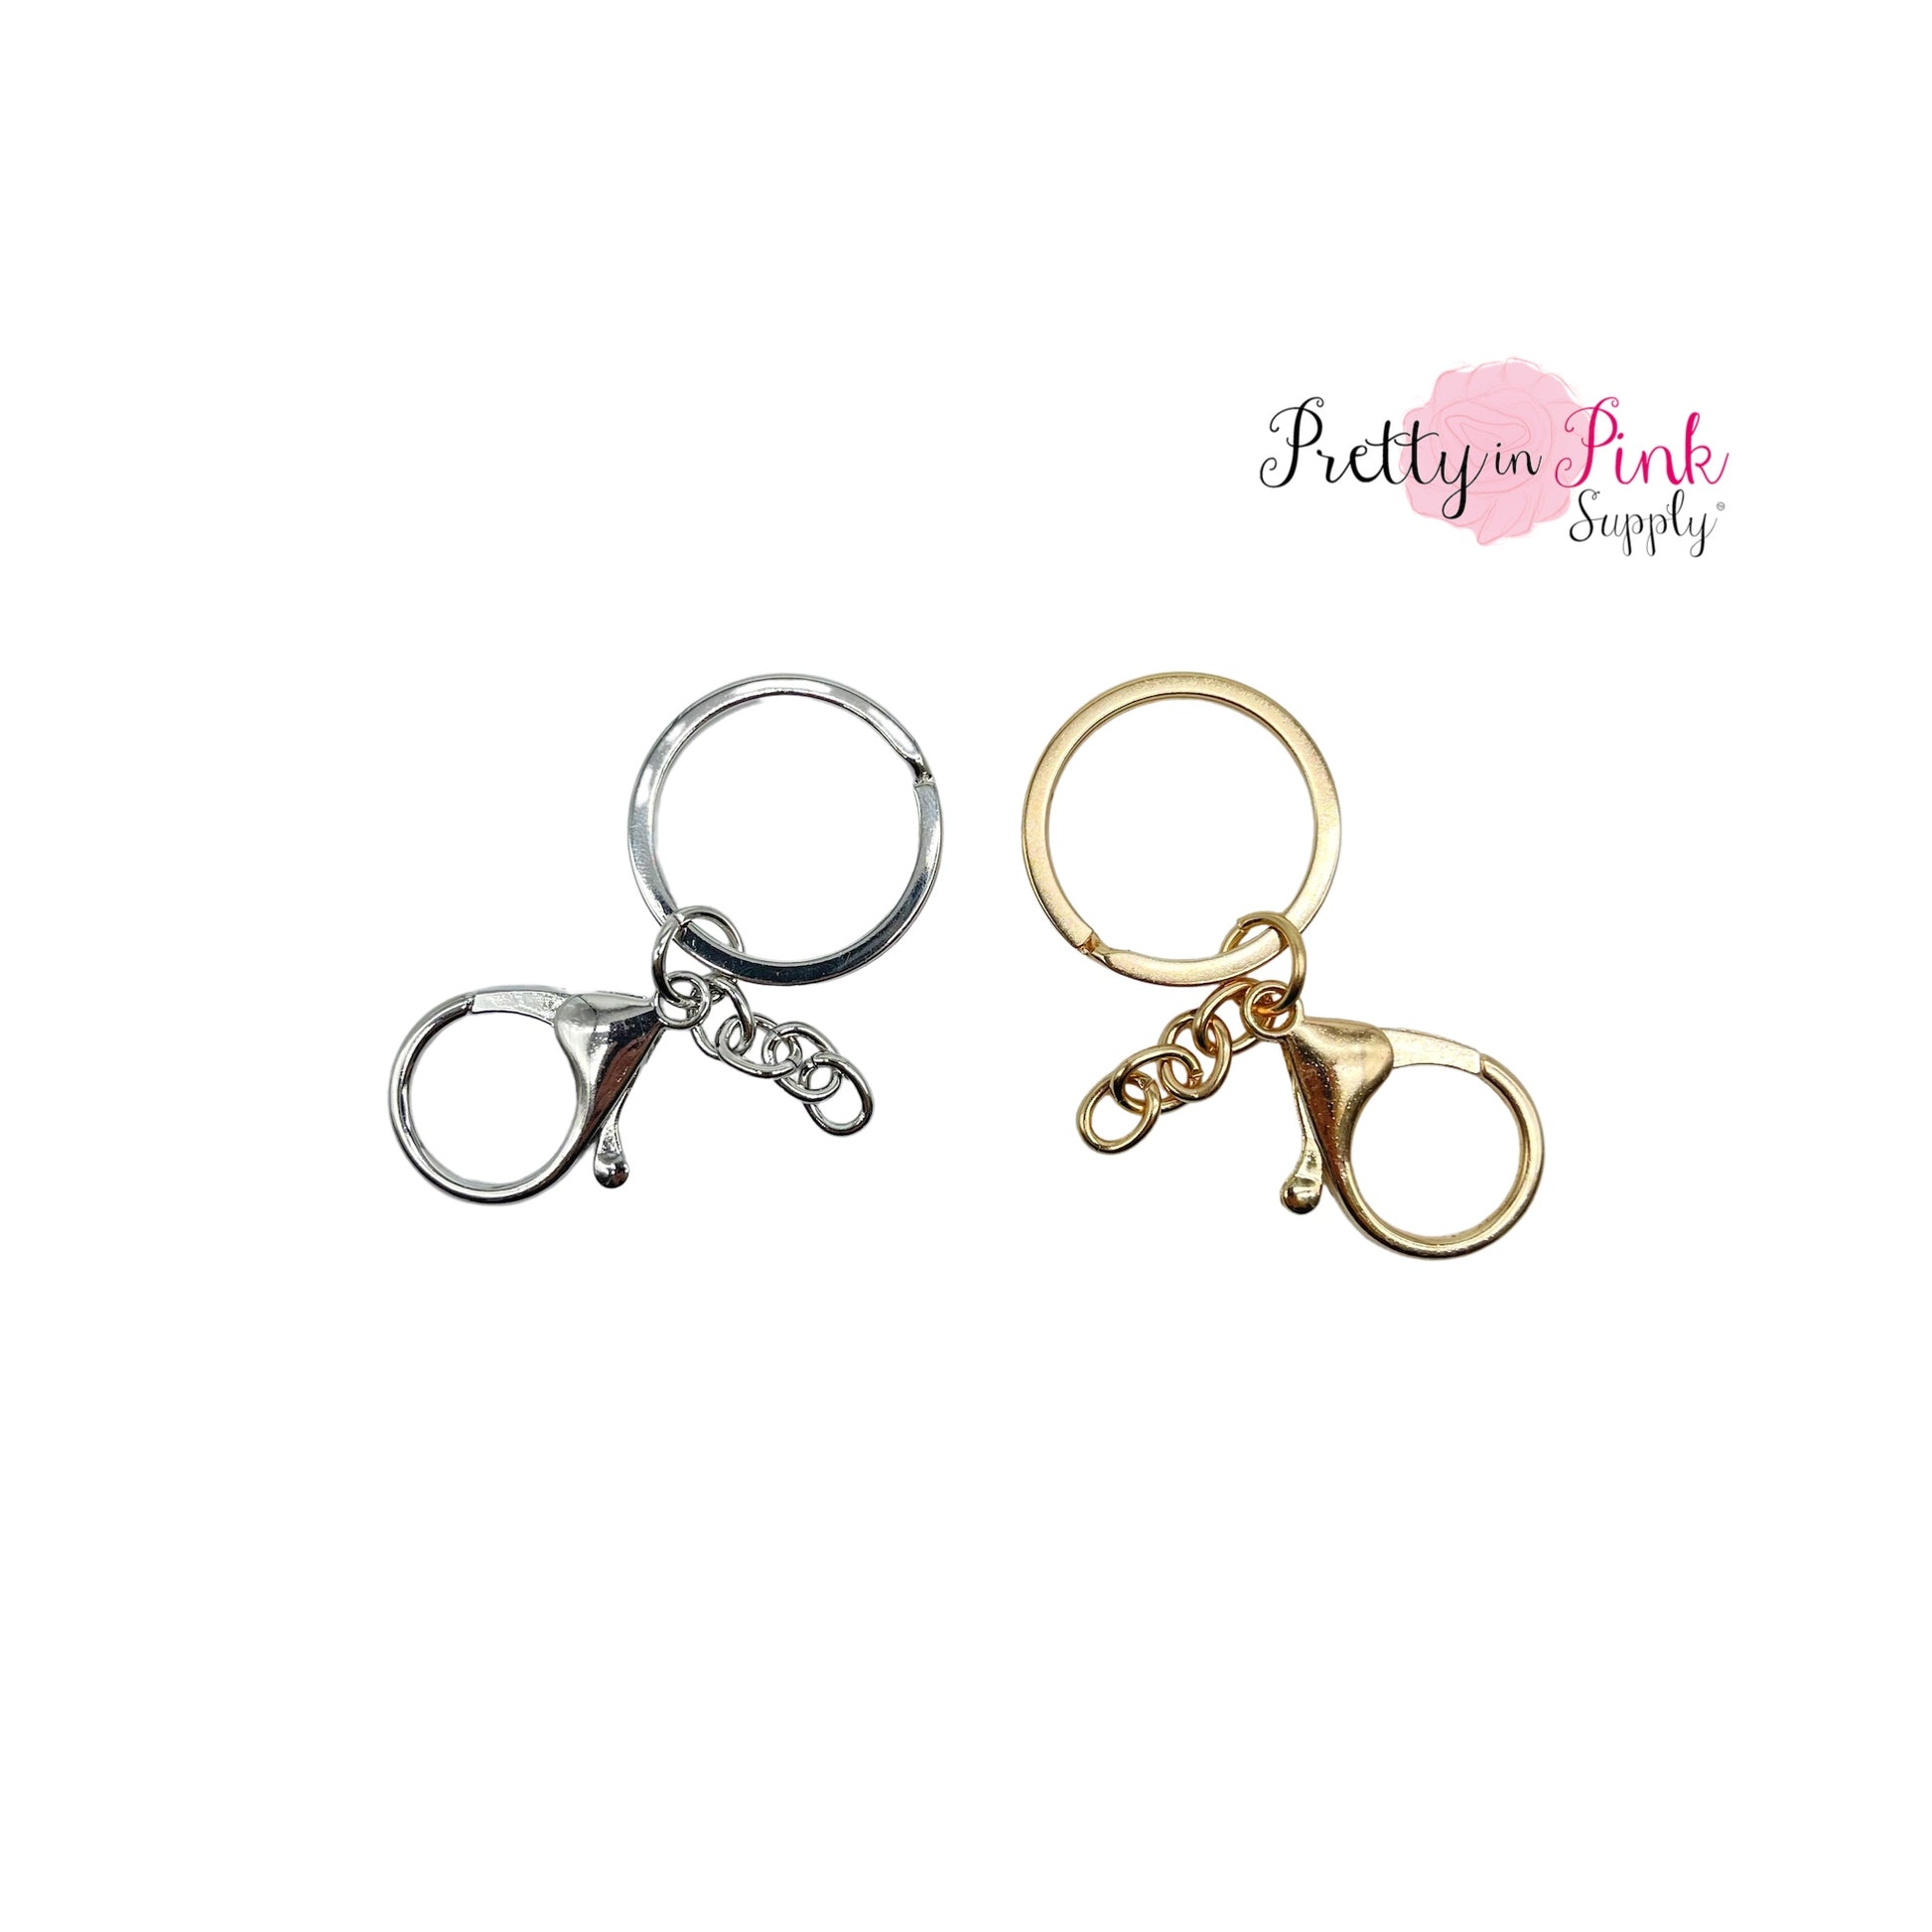 Silver and gold ring, chain and hook clasp for keychains.